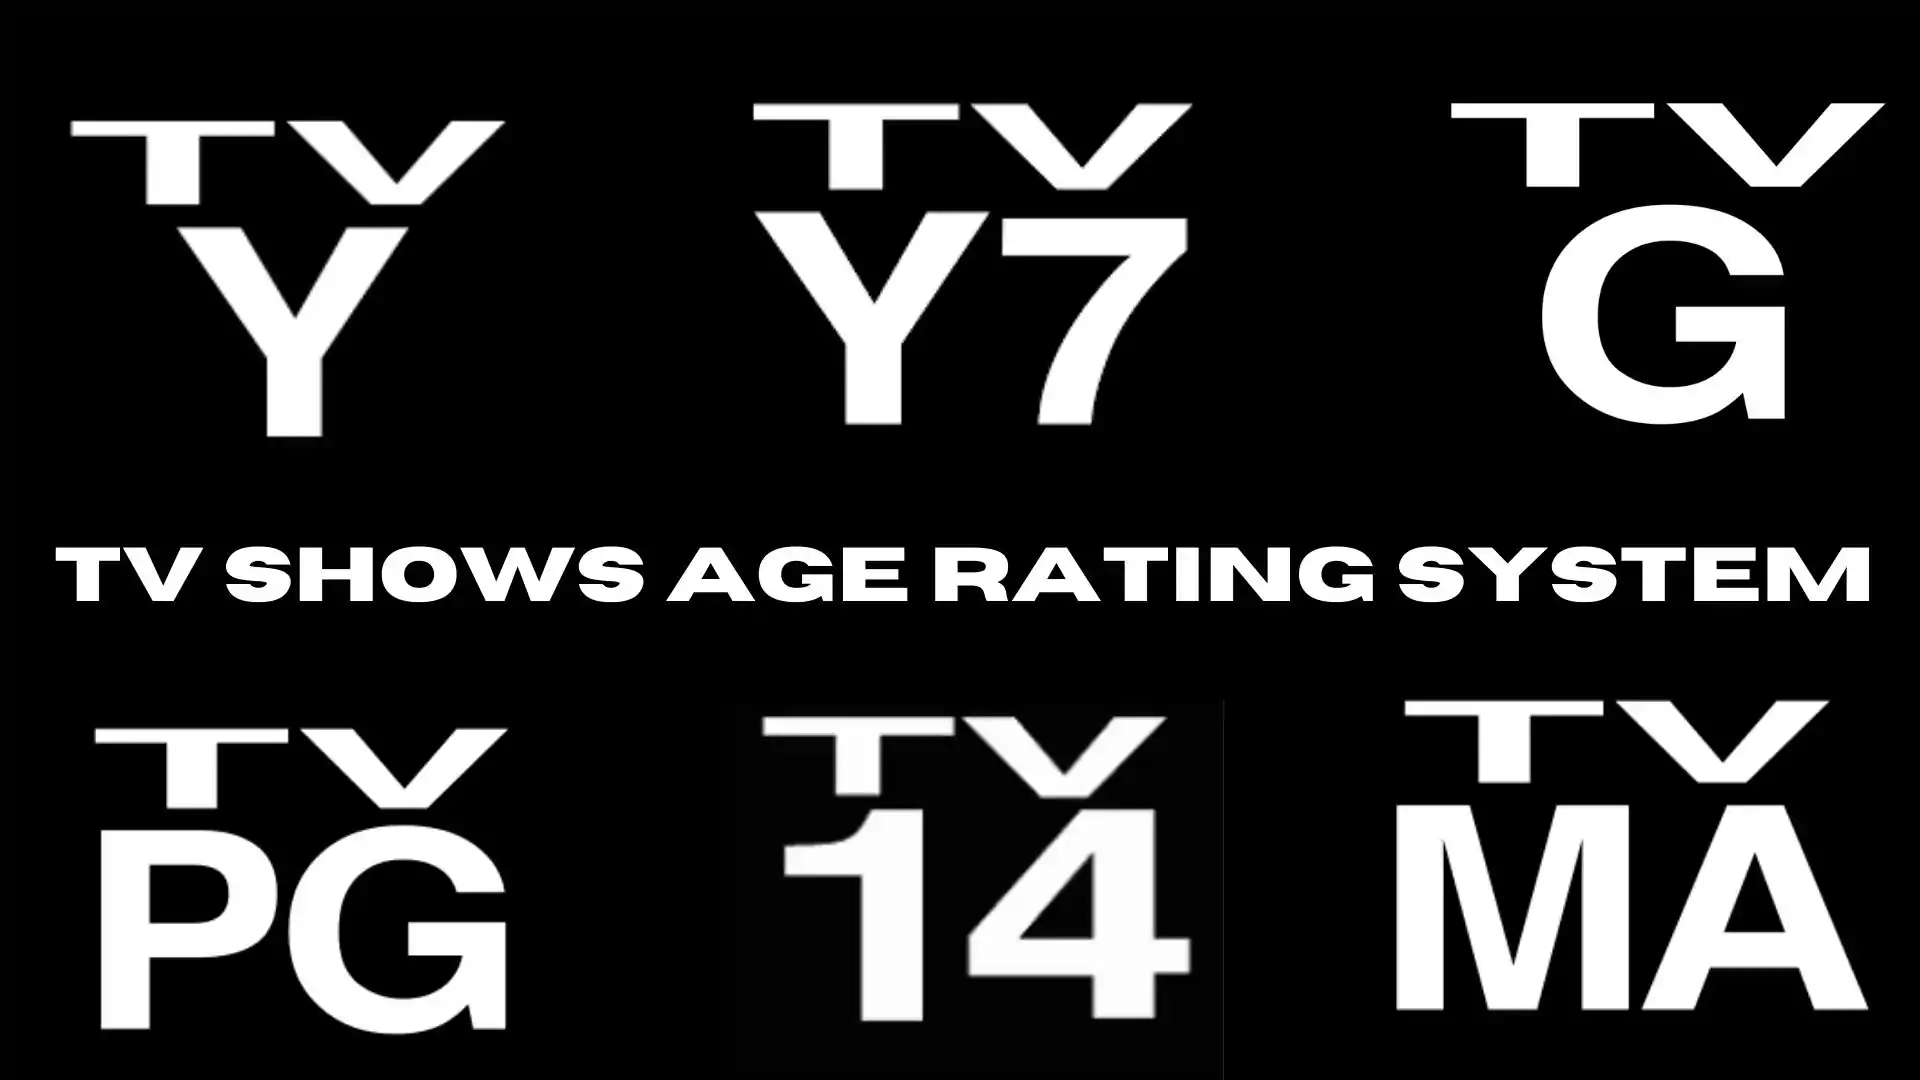 TV Shows Age Rating System | Age Ratinh juju %currentyear%